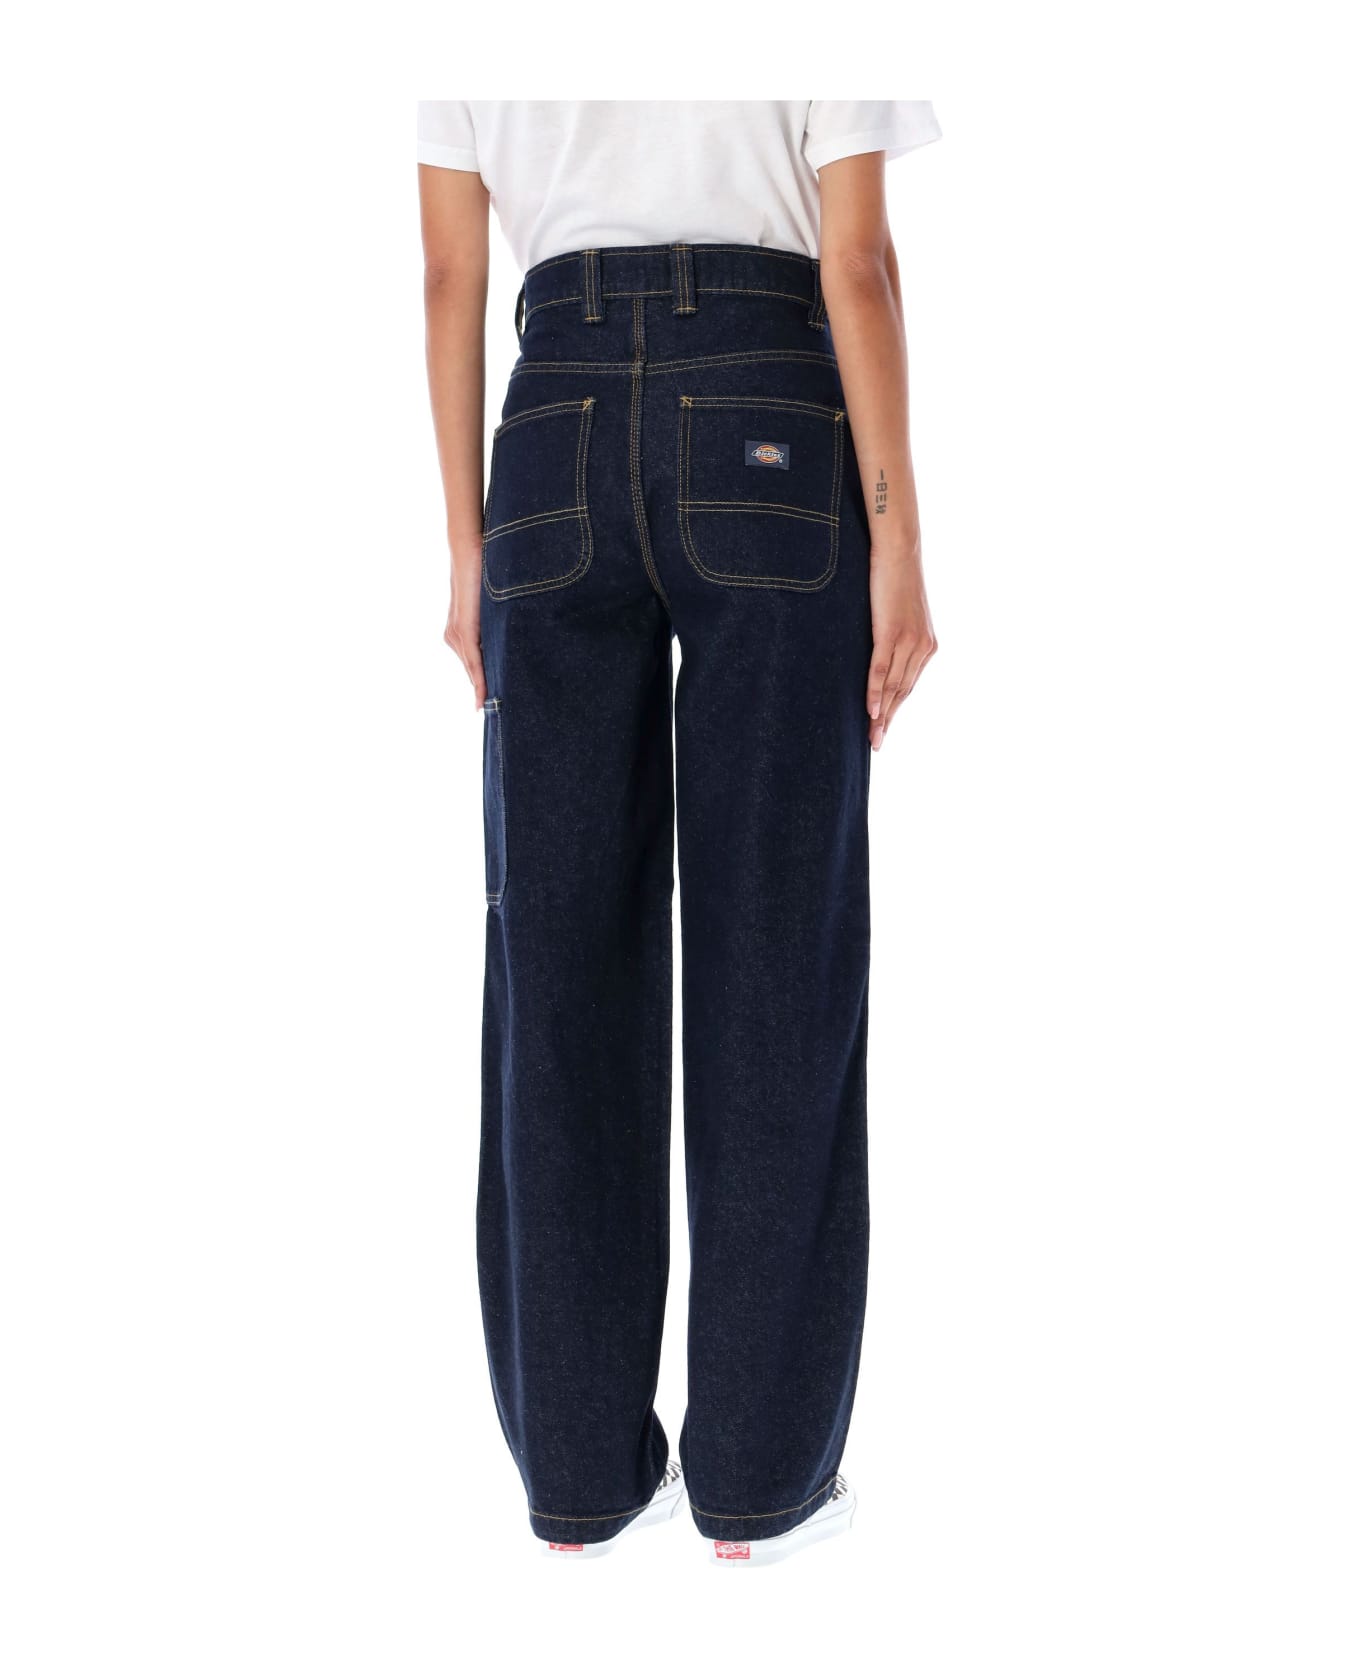 Dickies Madison Double Knee Jeans - BLUE RINSED